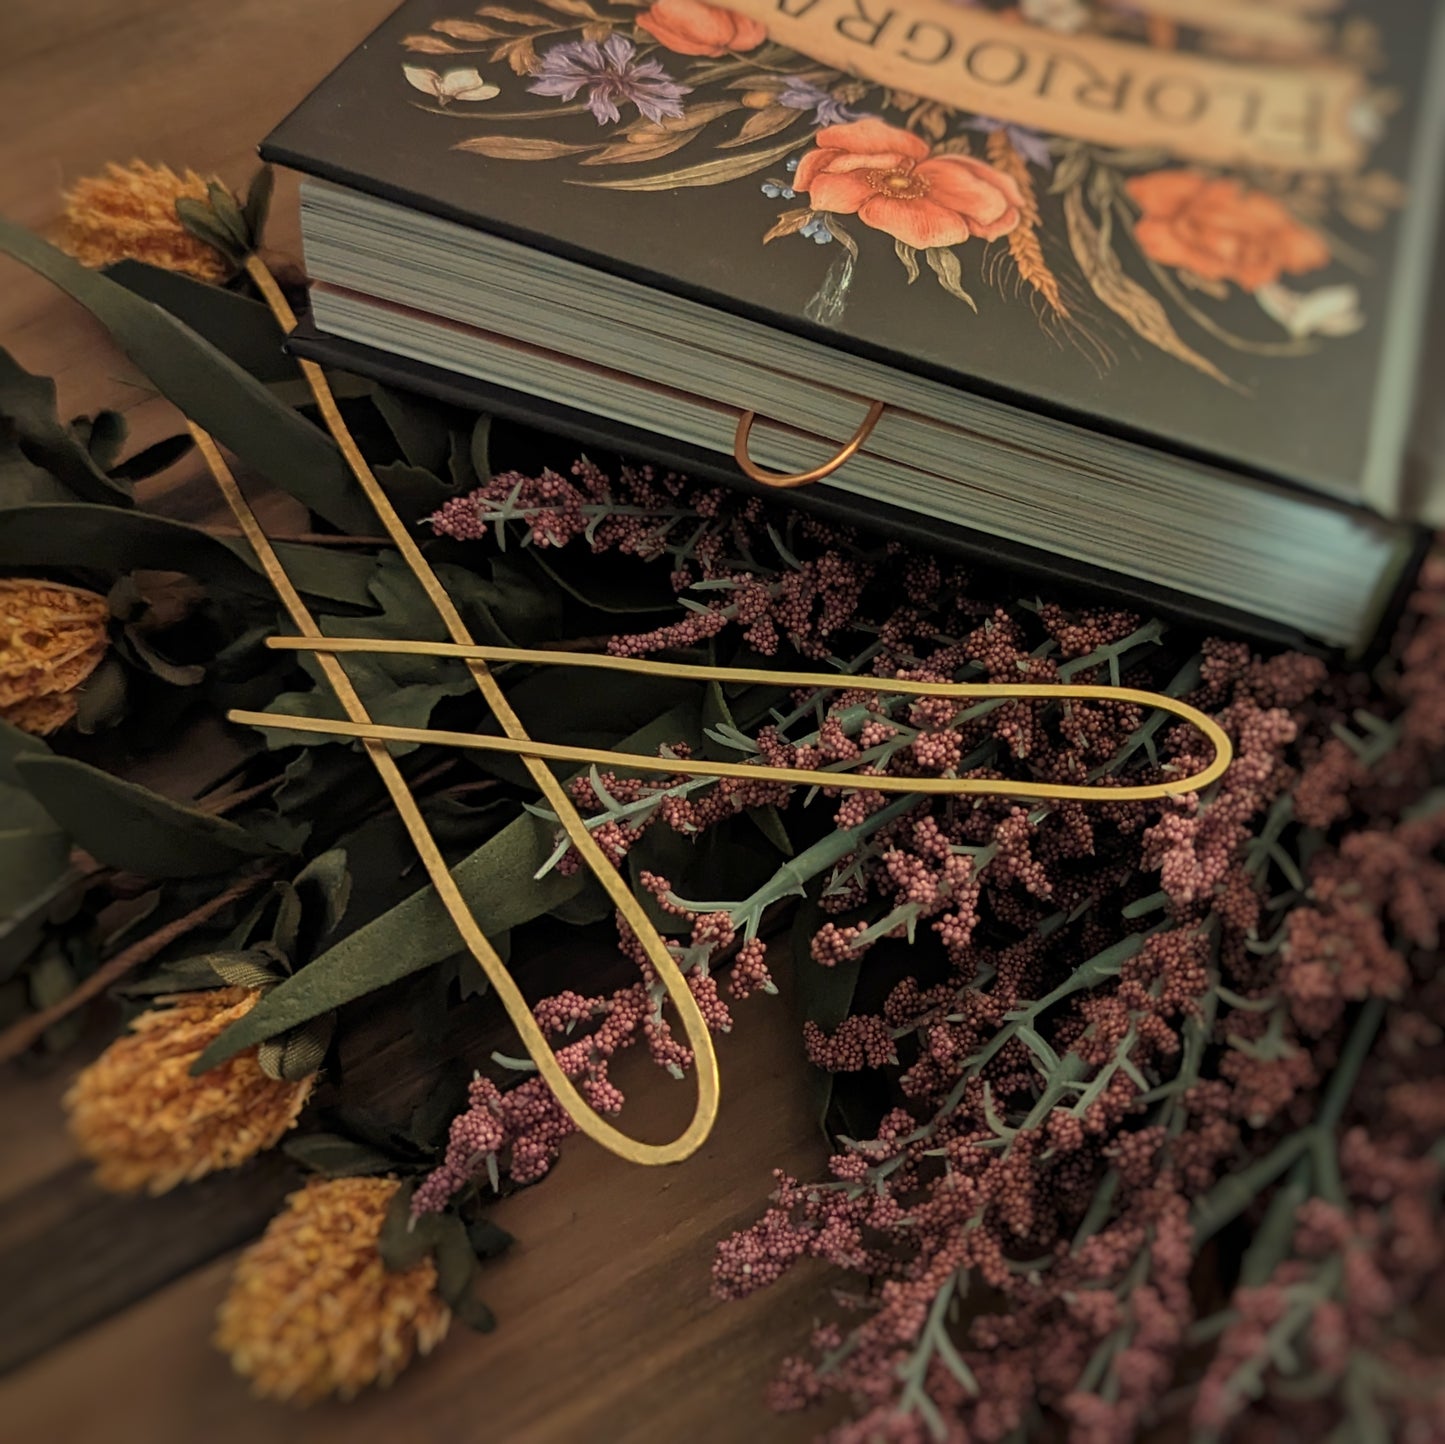 Two hammered brass wire book forks sit on a bed of flowers next to a Floriography book with a pink copper book fork marking two pages.